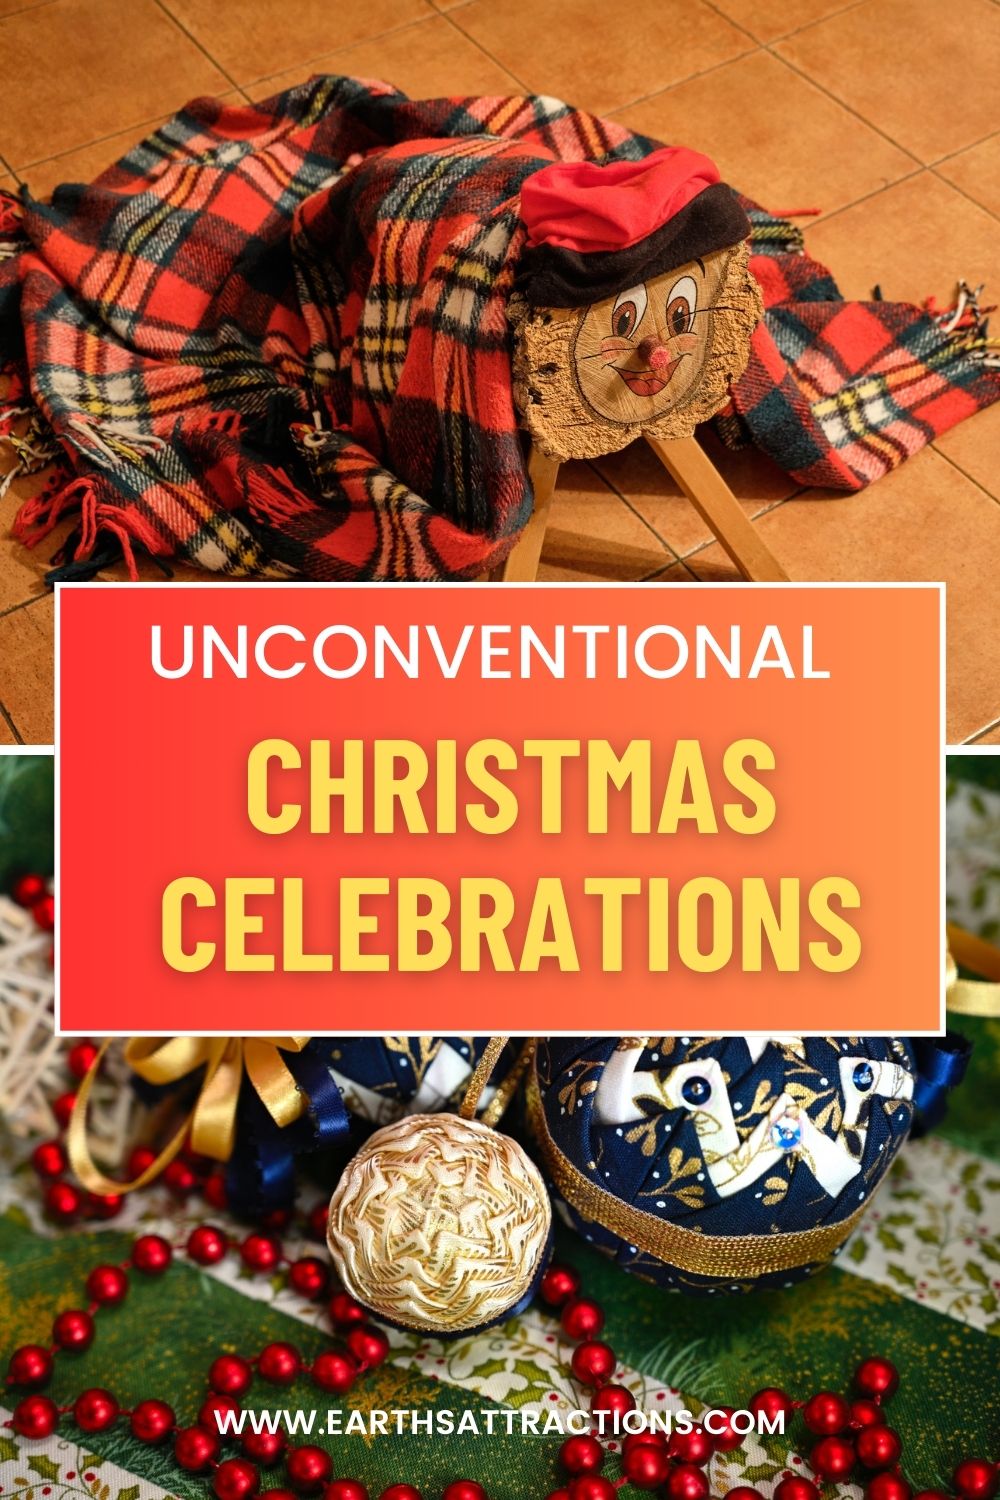 Unconventional Christmas Celebrations: Quirky Christmas Traditions around the globe. Discover unique Christmas traditions :) #christmas #christmastraditions #christmascelebrations #christmascustoms #quirkychristmas #usa #europe #japan #holidays #winterholidays 